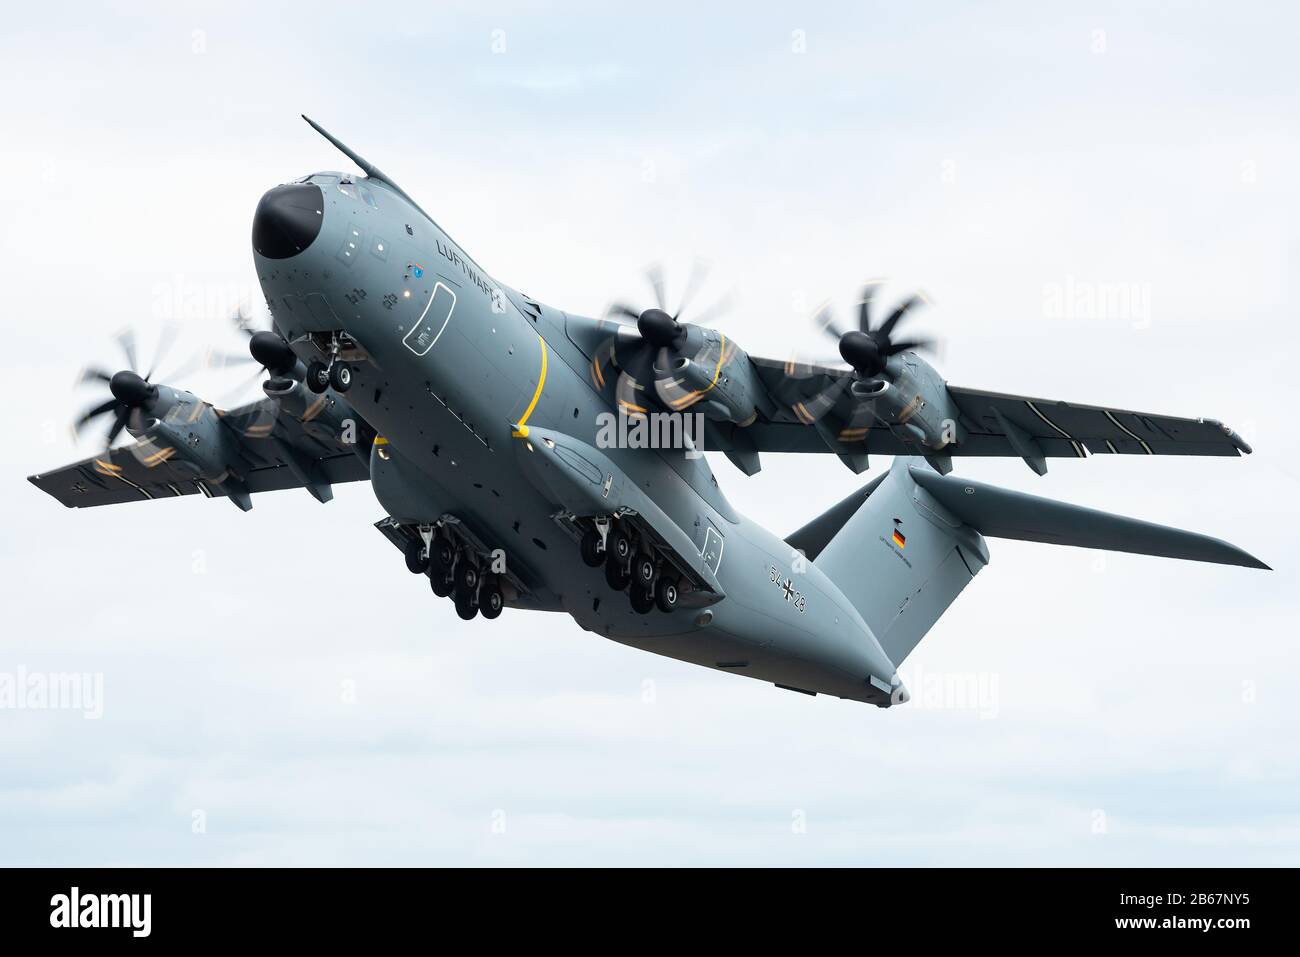 An Airbus A400M Atlas military transport aircraft of the German Air Force. Stock Photo